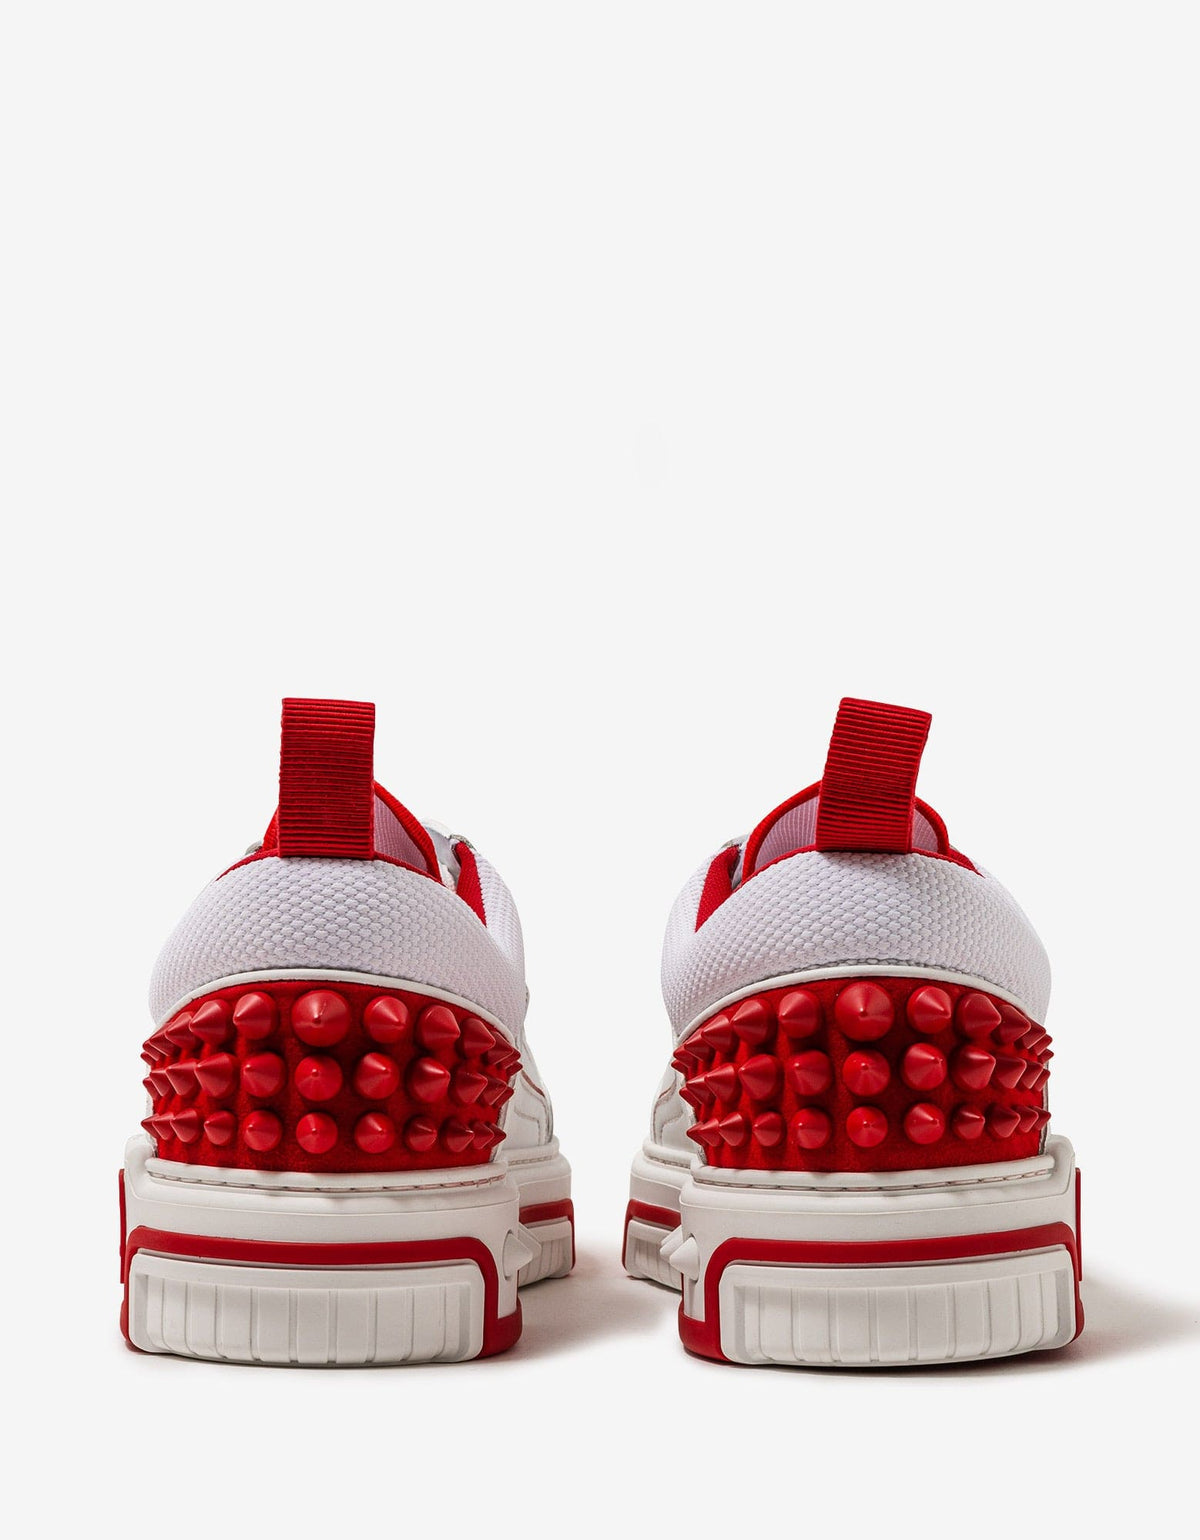 Christian Louboutin Astroloubi White & Red Trainers -